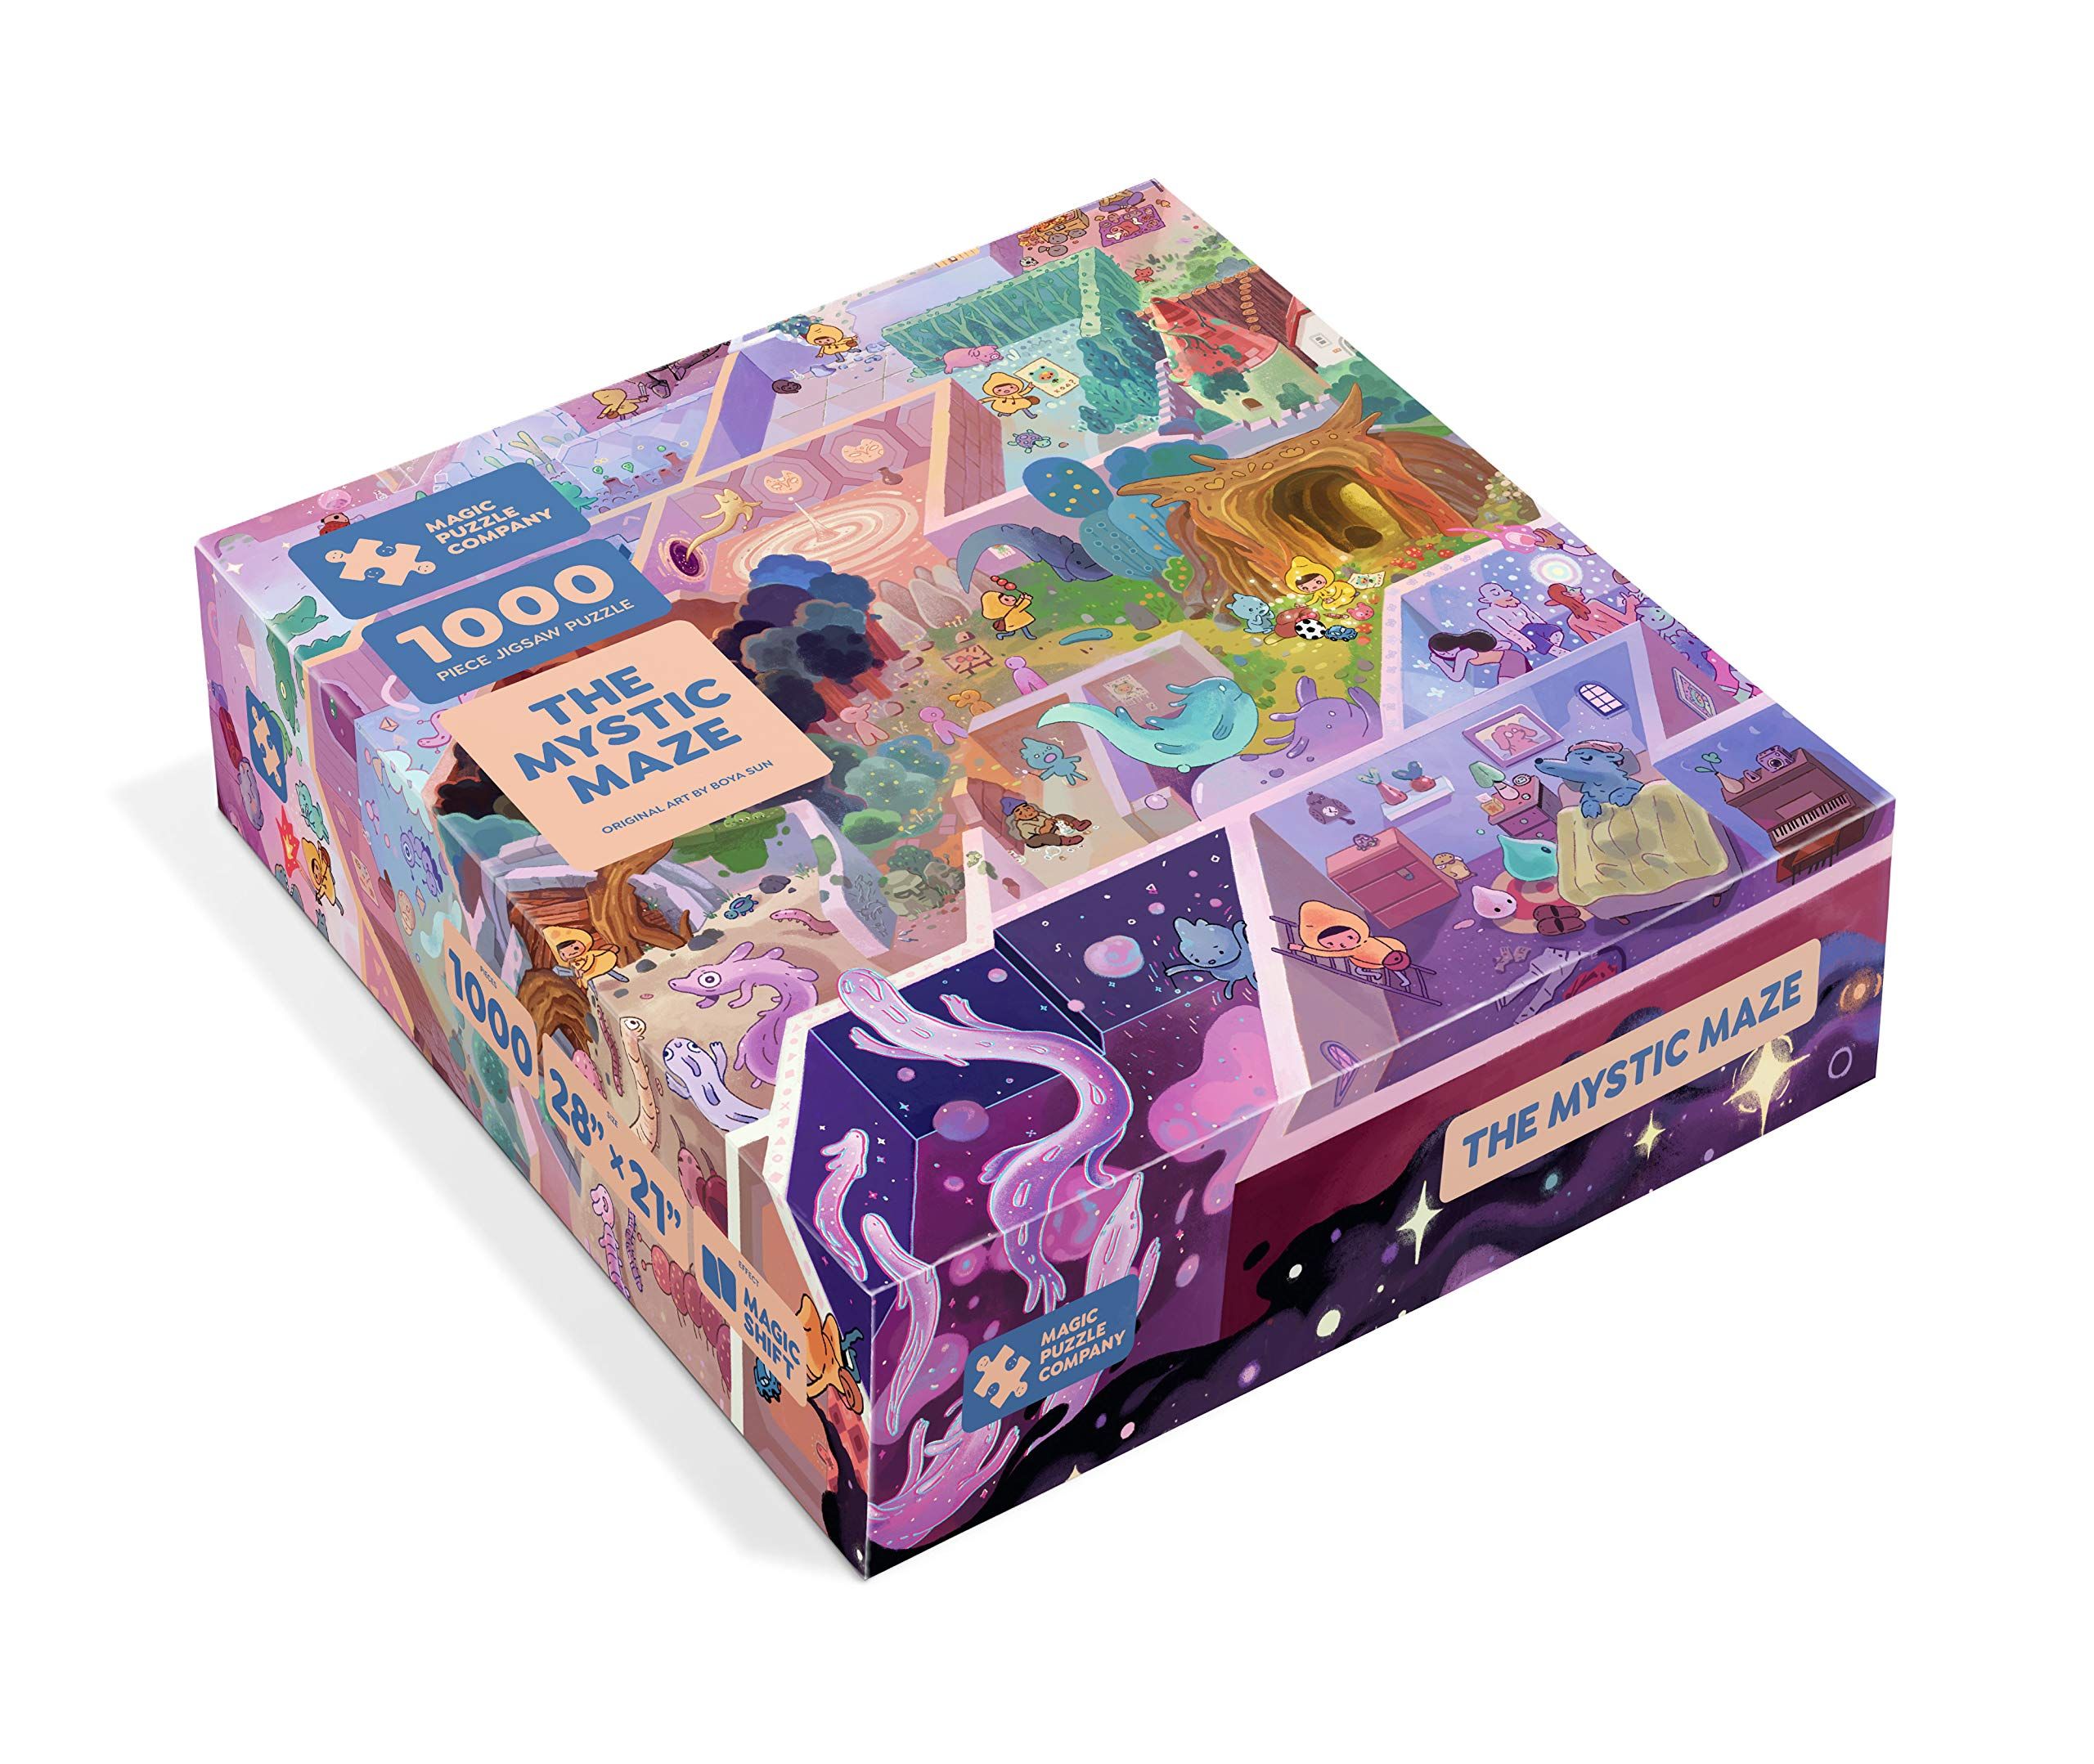 The Mystic Maze • 1000-Piece Jigsaw Puzzle from The Magic Puzzle Company • Series One | Amazon (US)